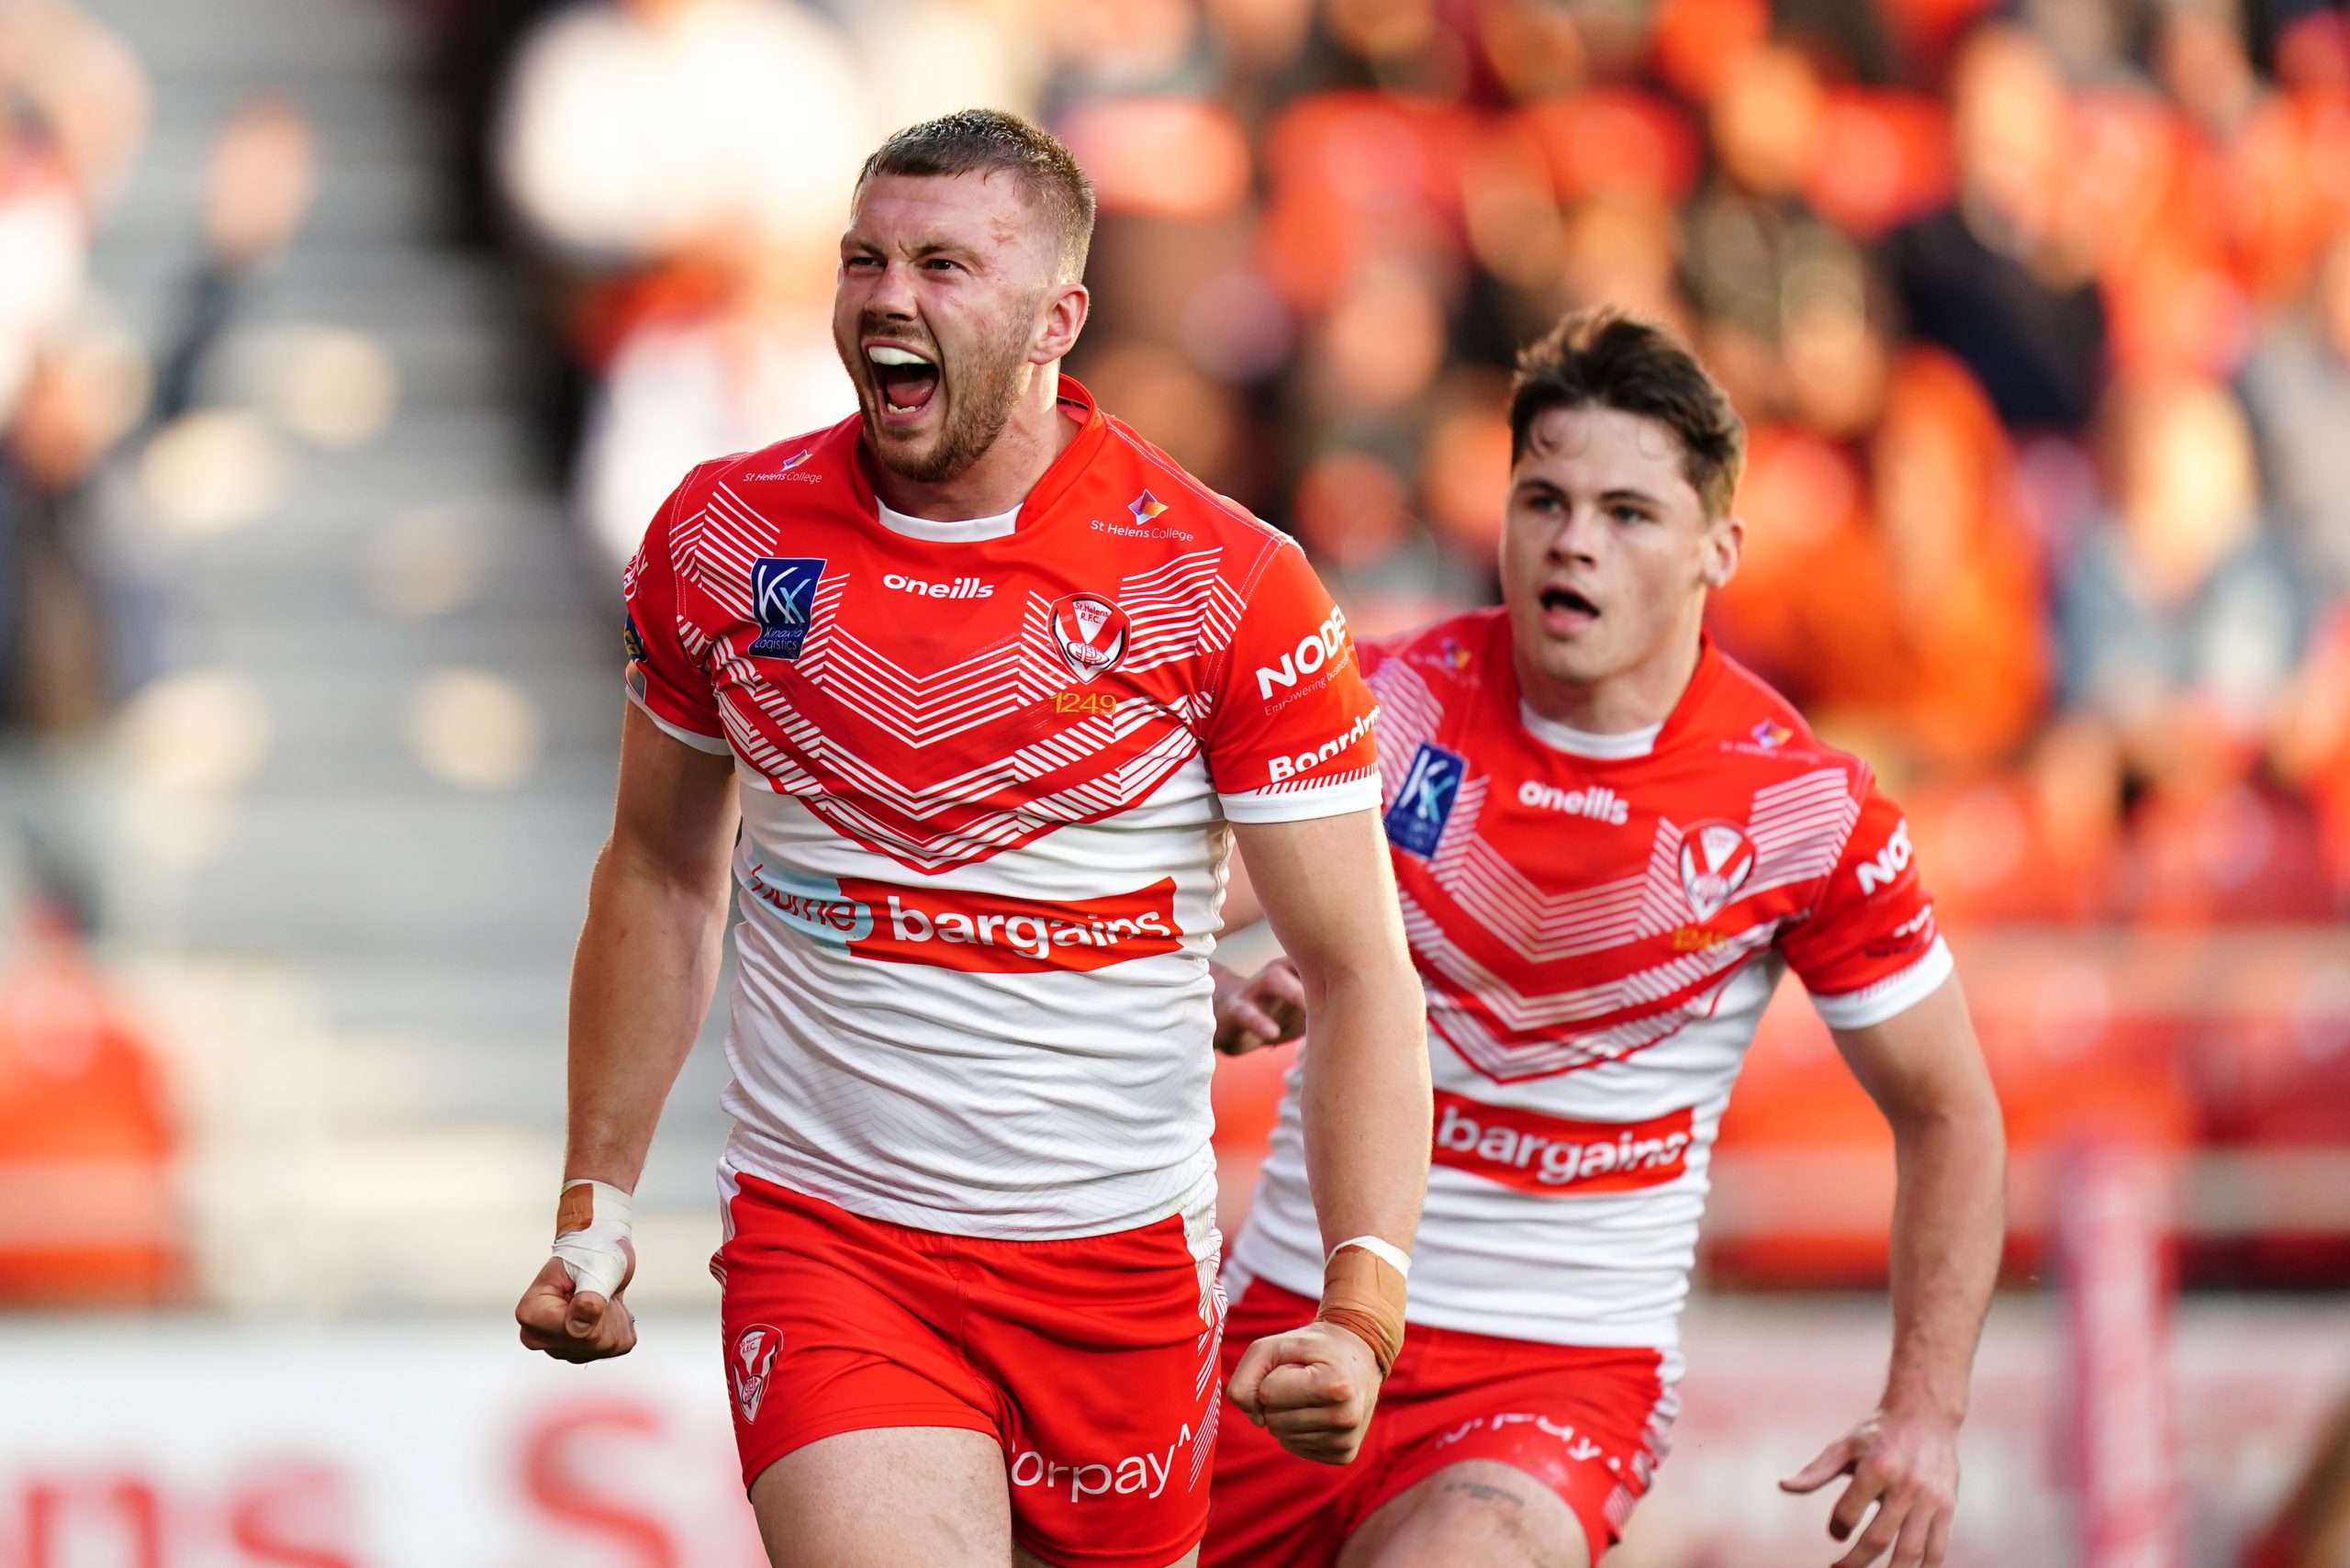 Huge blow for St Helens with Joe Batchelor out of World Club Challenge